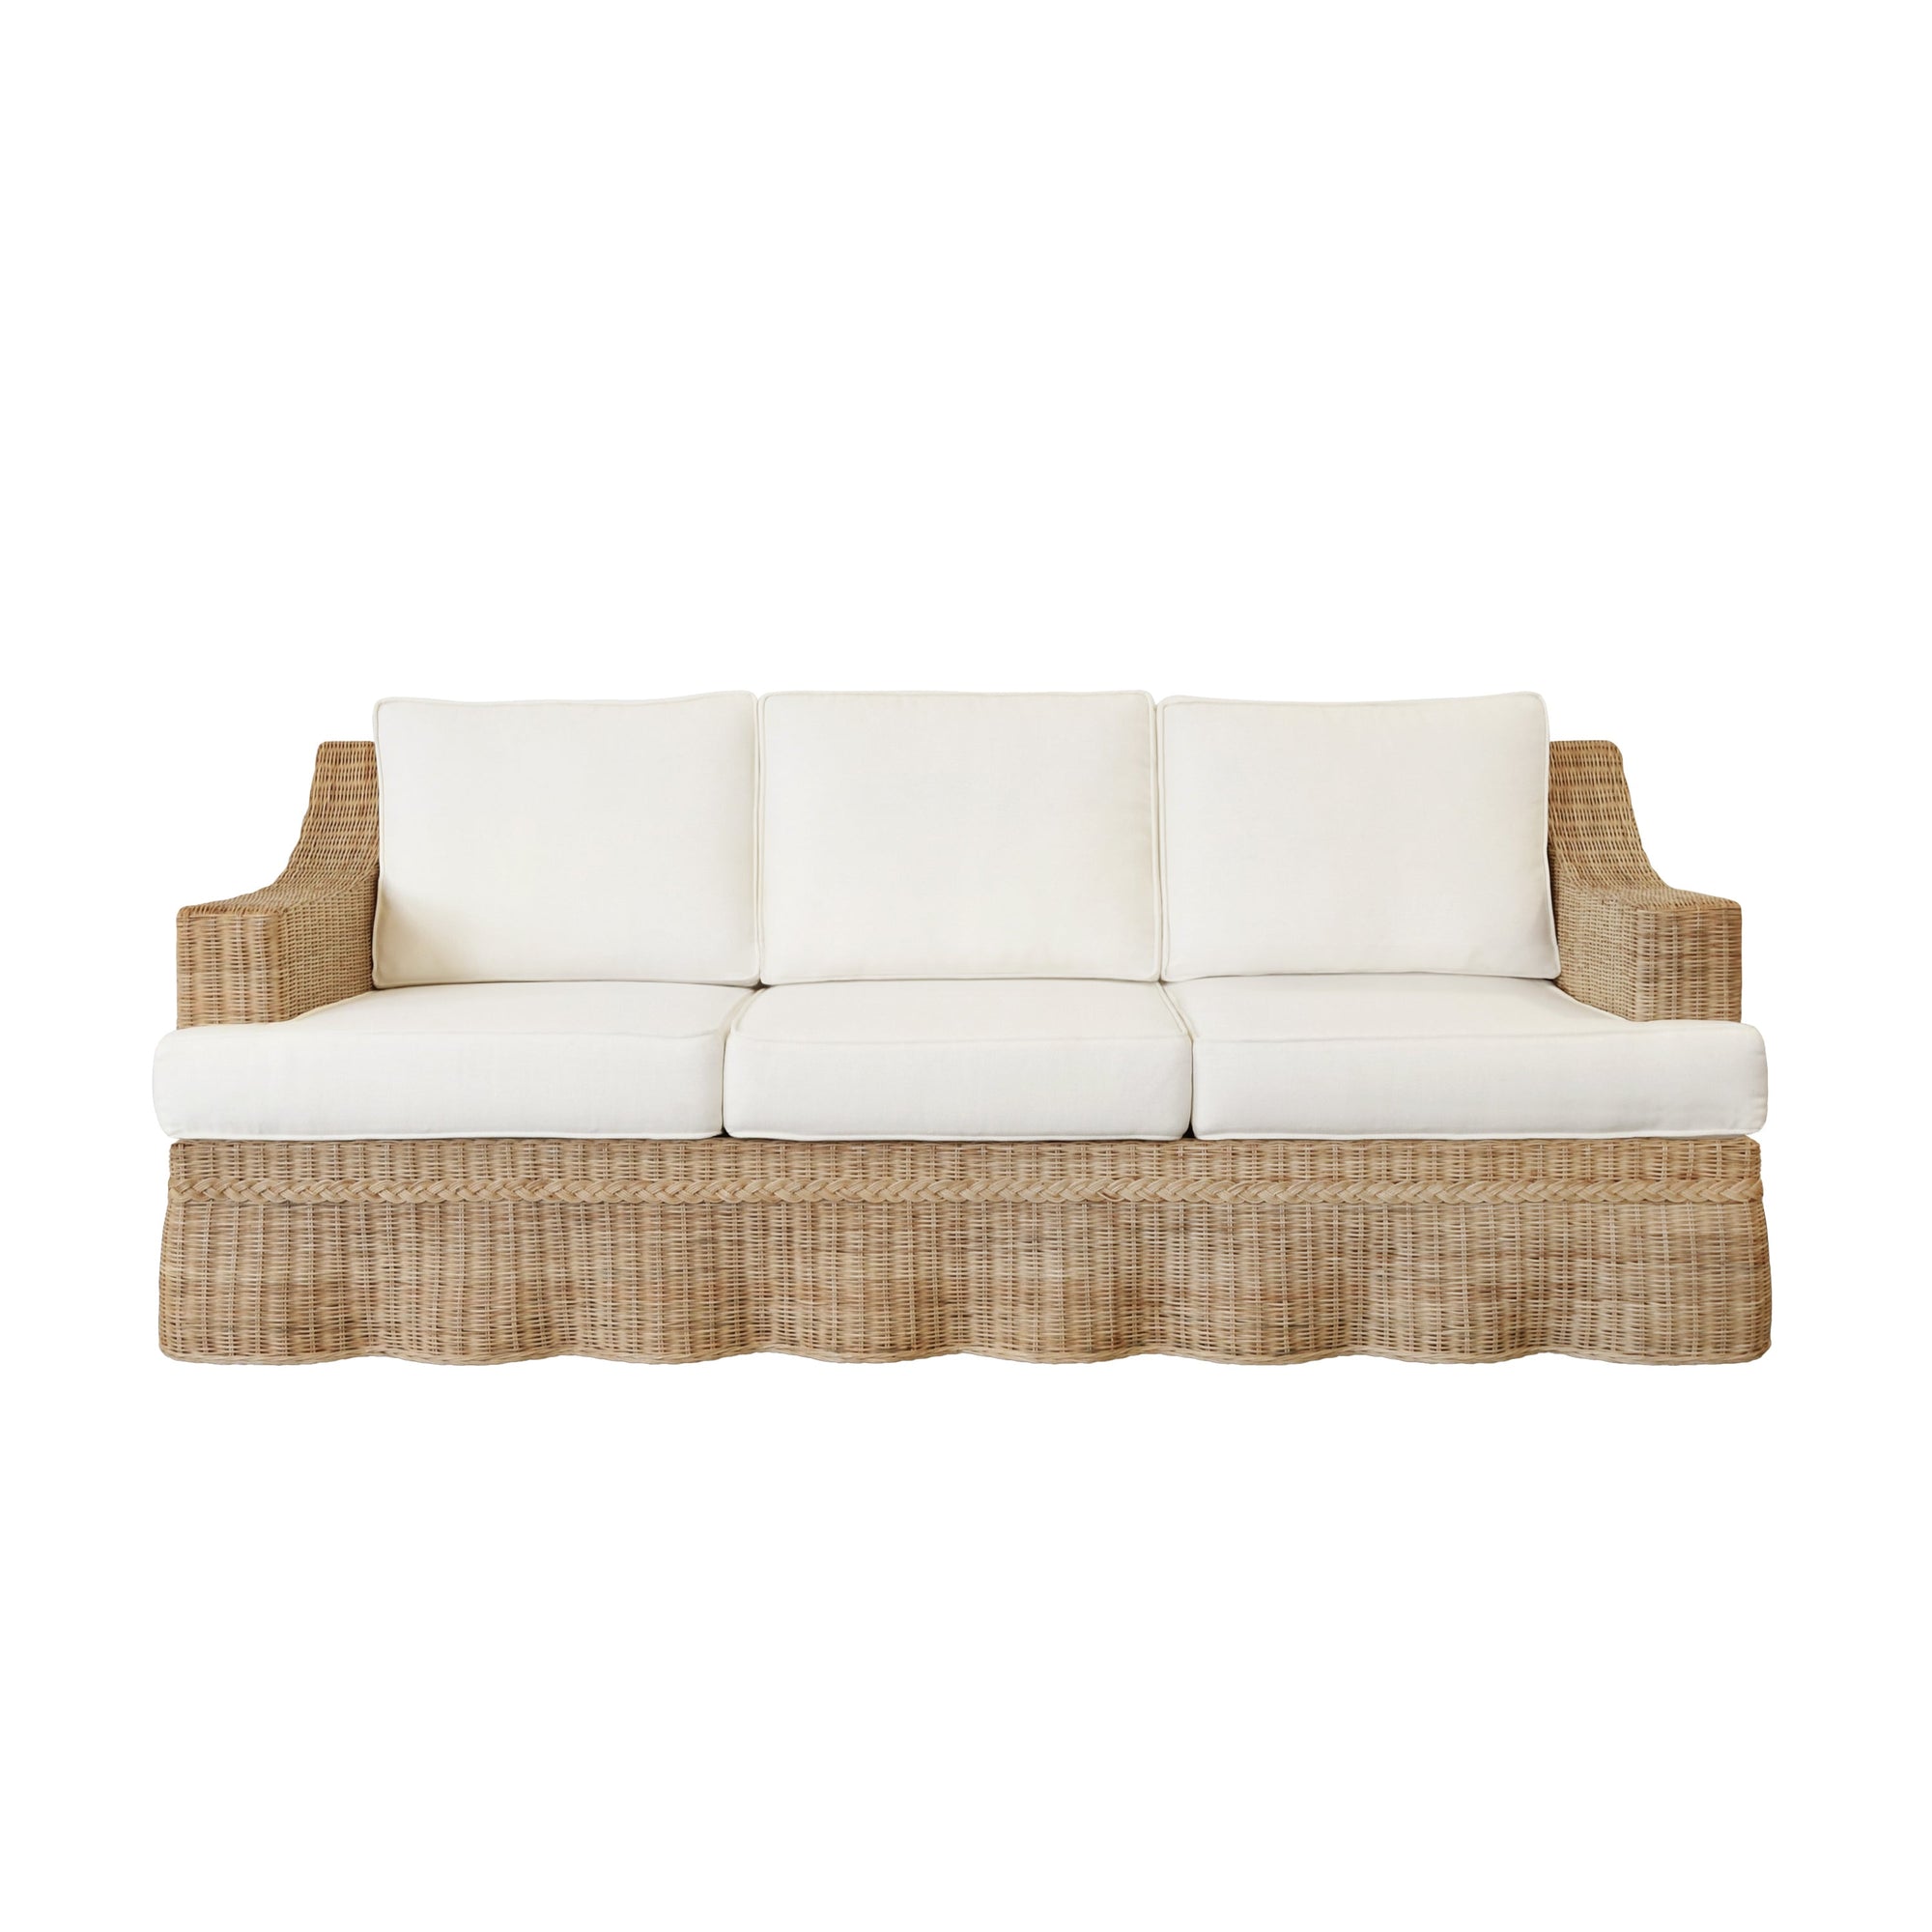 Daphne Sofa by Worlds Away - Front View with Linen and Rattan